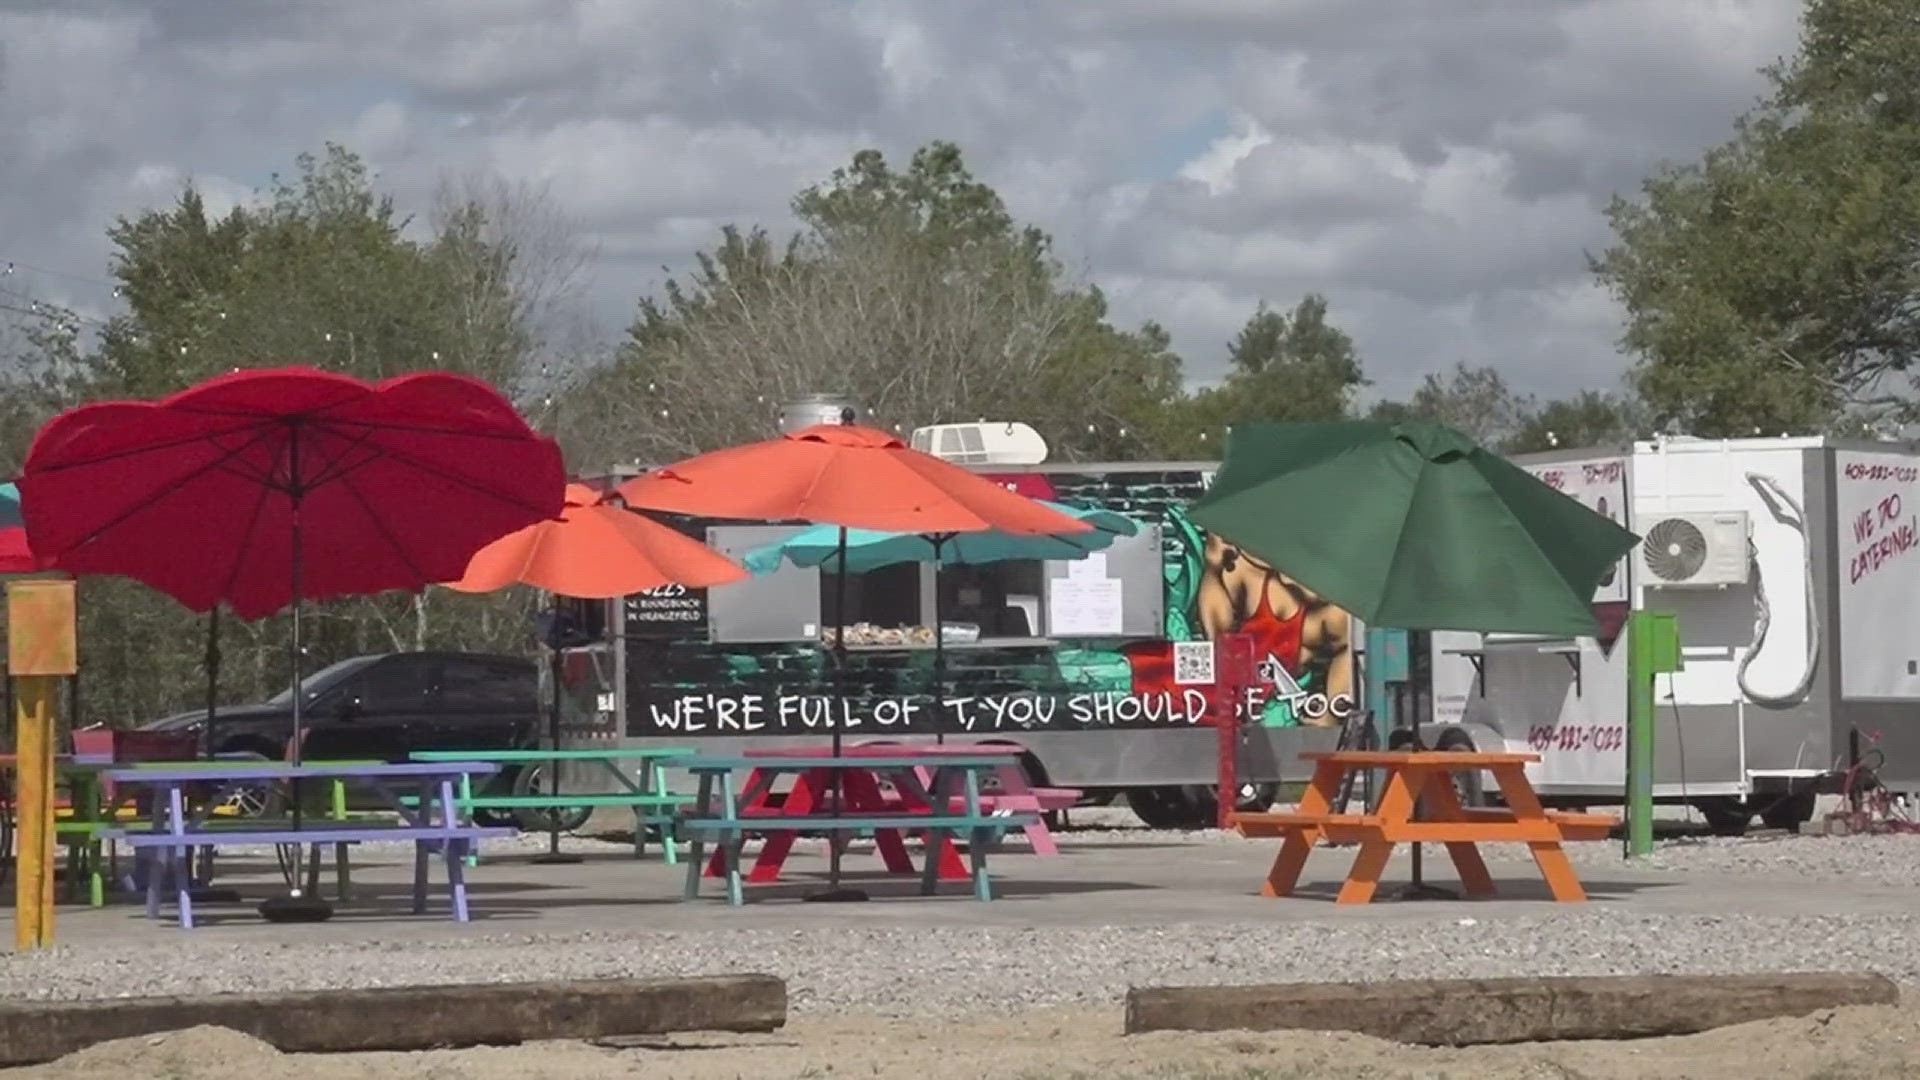 Orange County Truck Yard is the county's first food truck park.